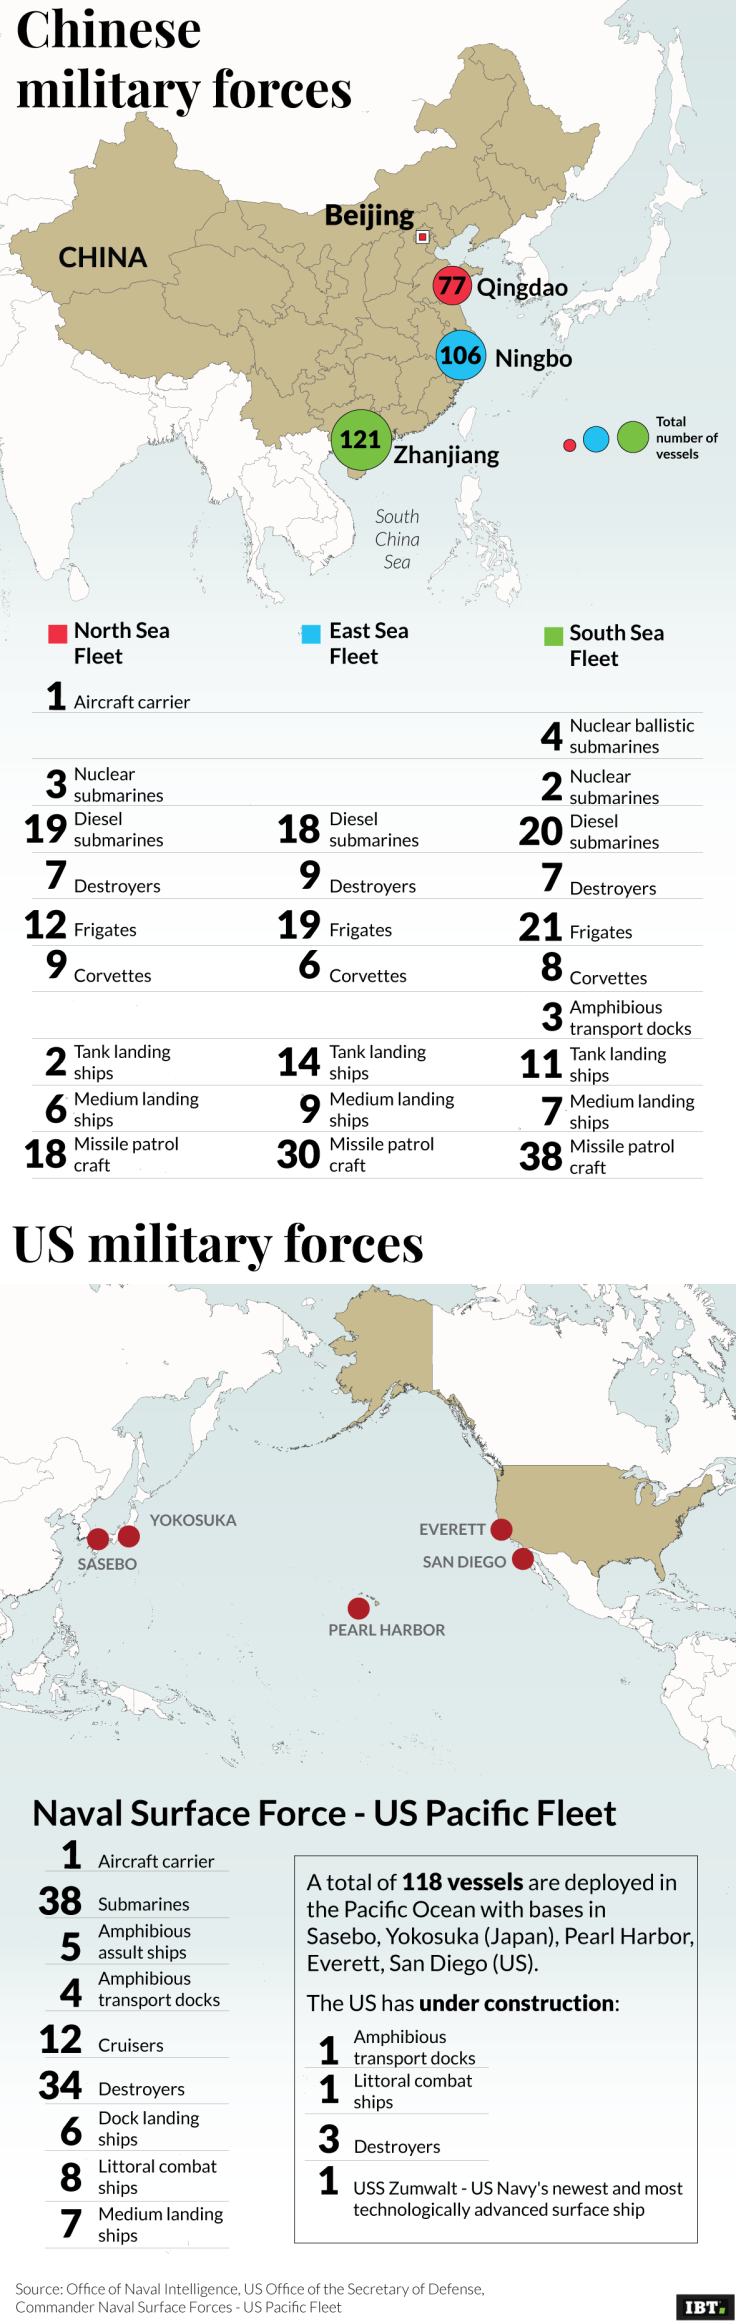 China and US naval forces - Pacific